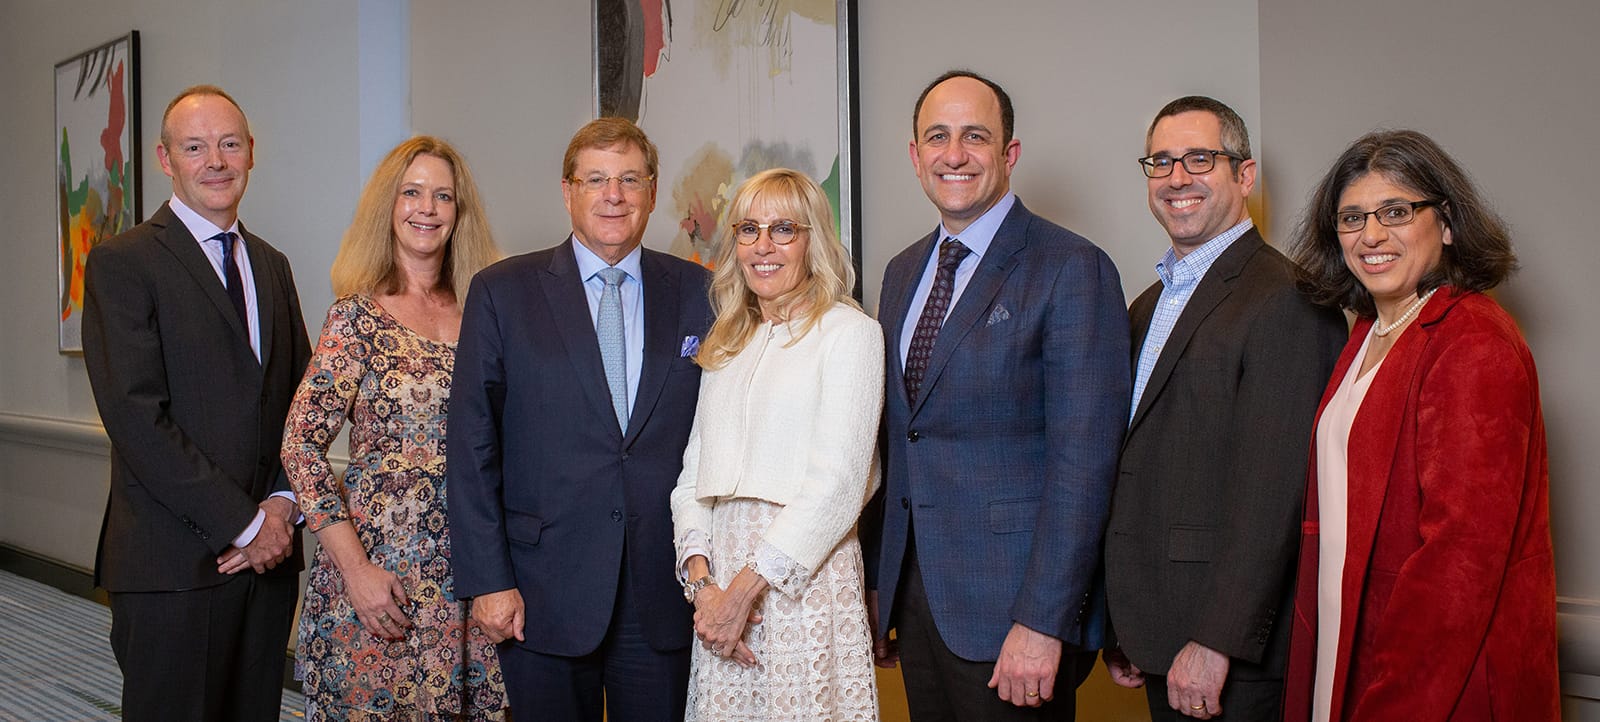 <p>Bruce and Cynthia Sherman with the 2018 Selection Committee</p>
